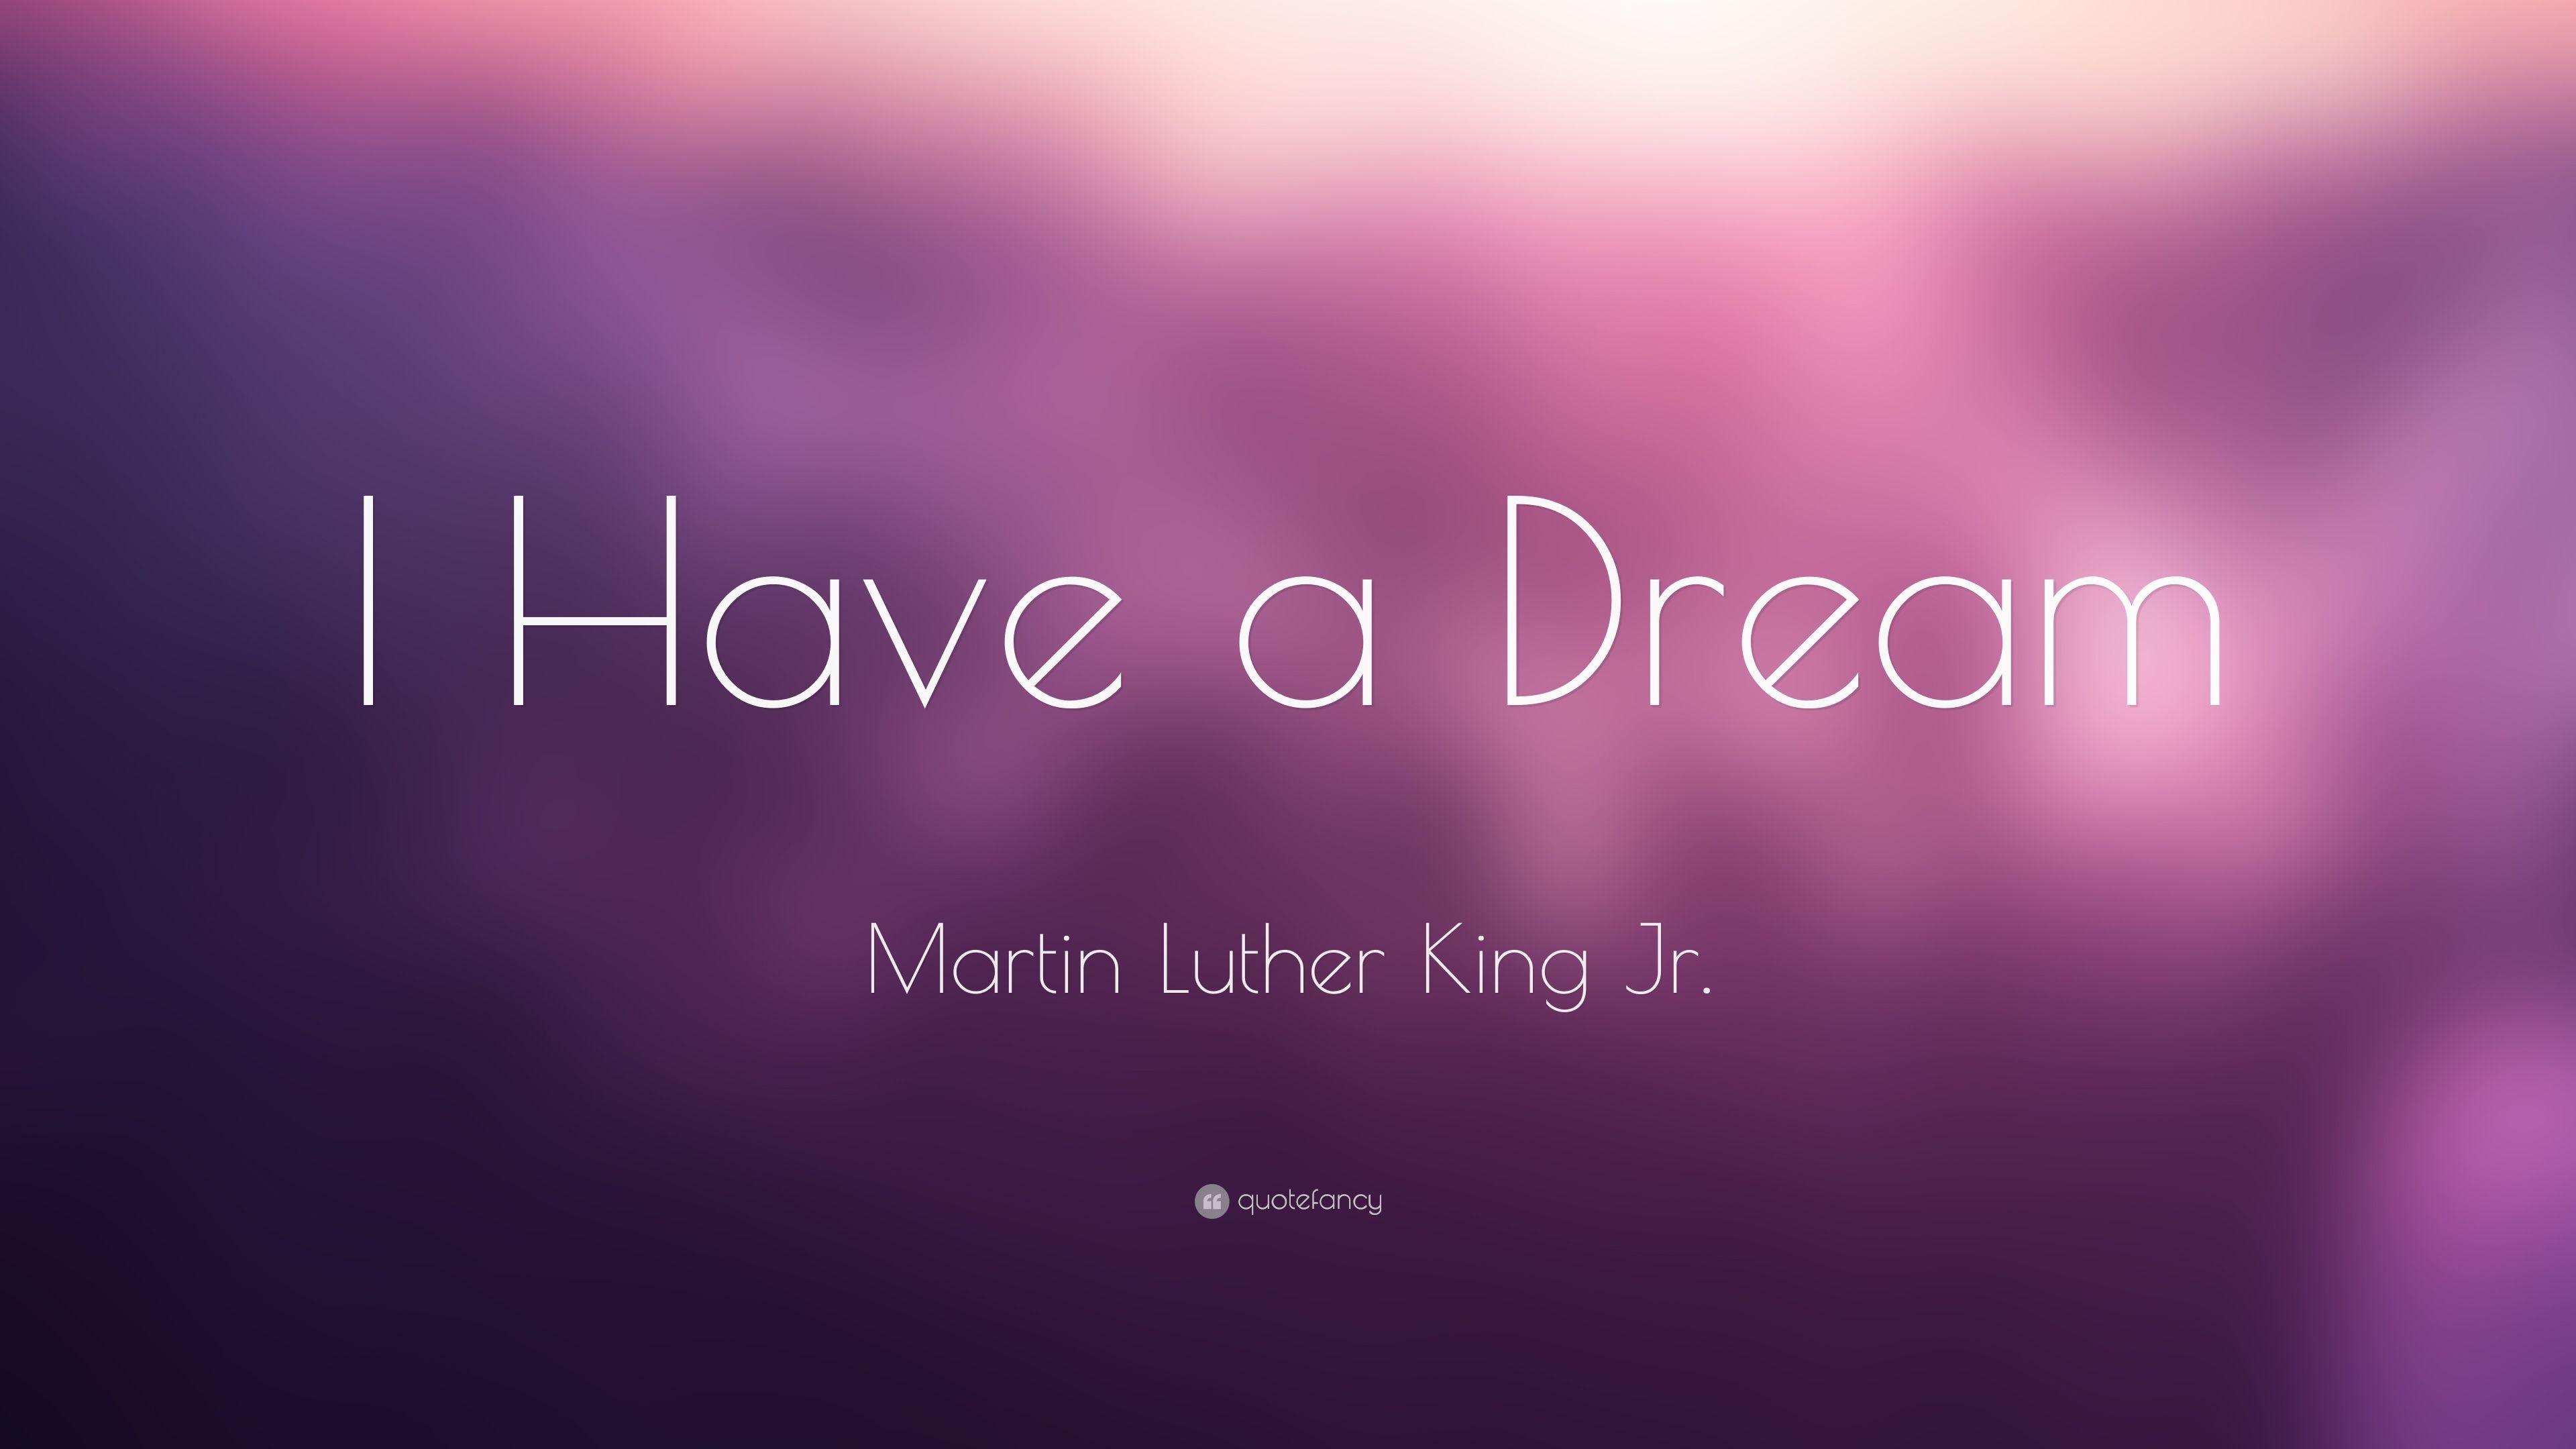 I Have a Dream Wallpaper Free I Have a Dream Background